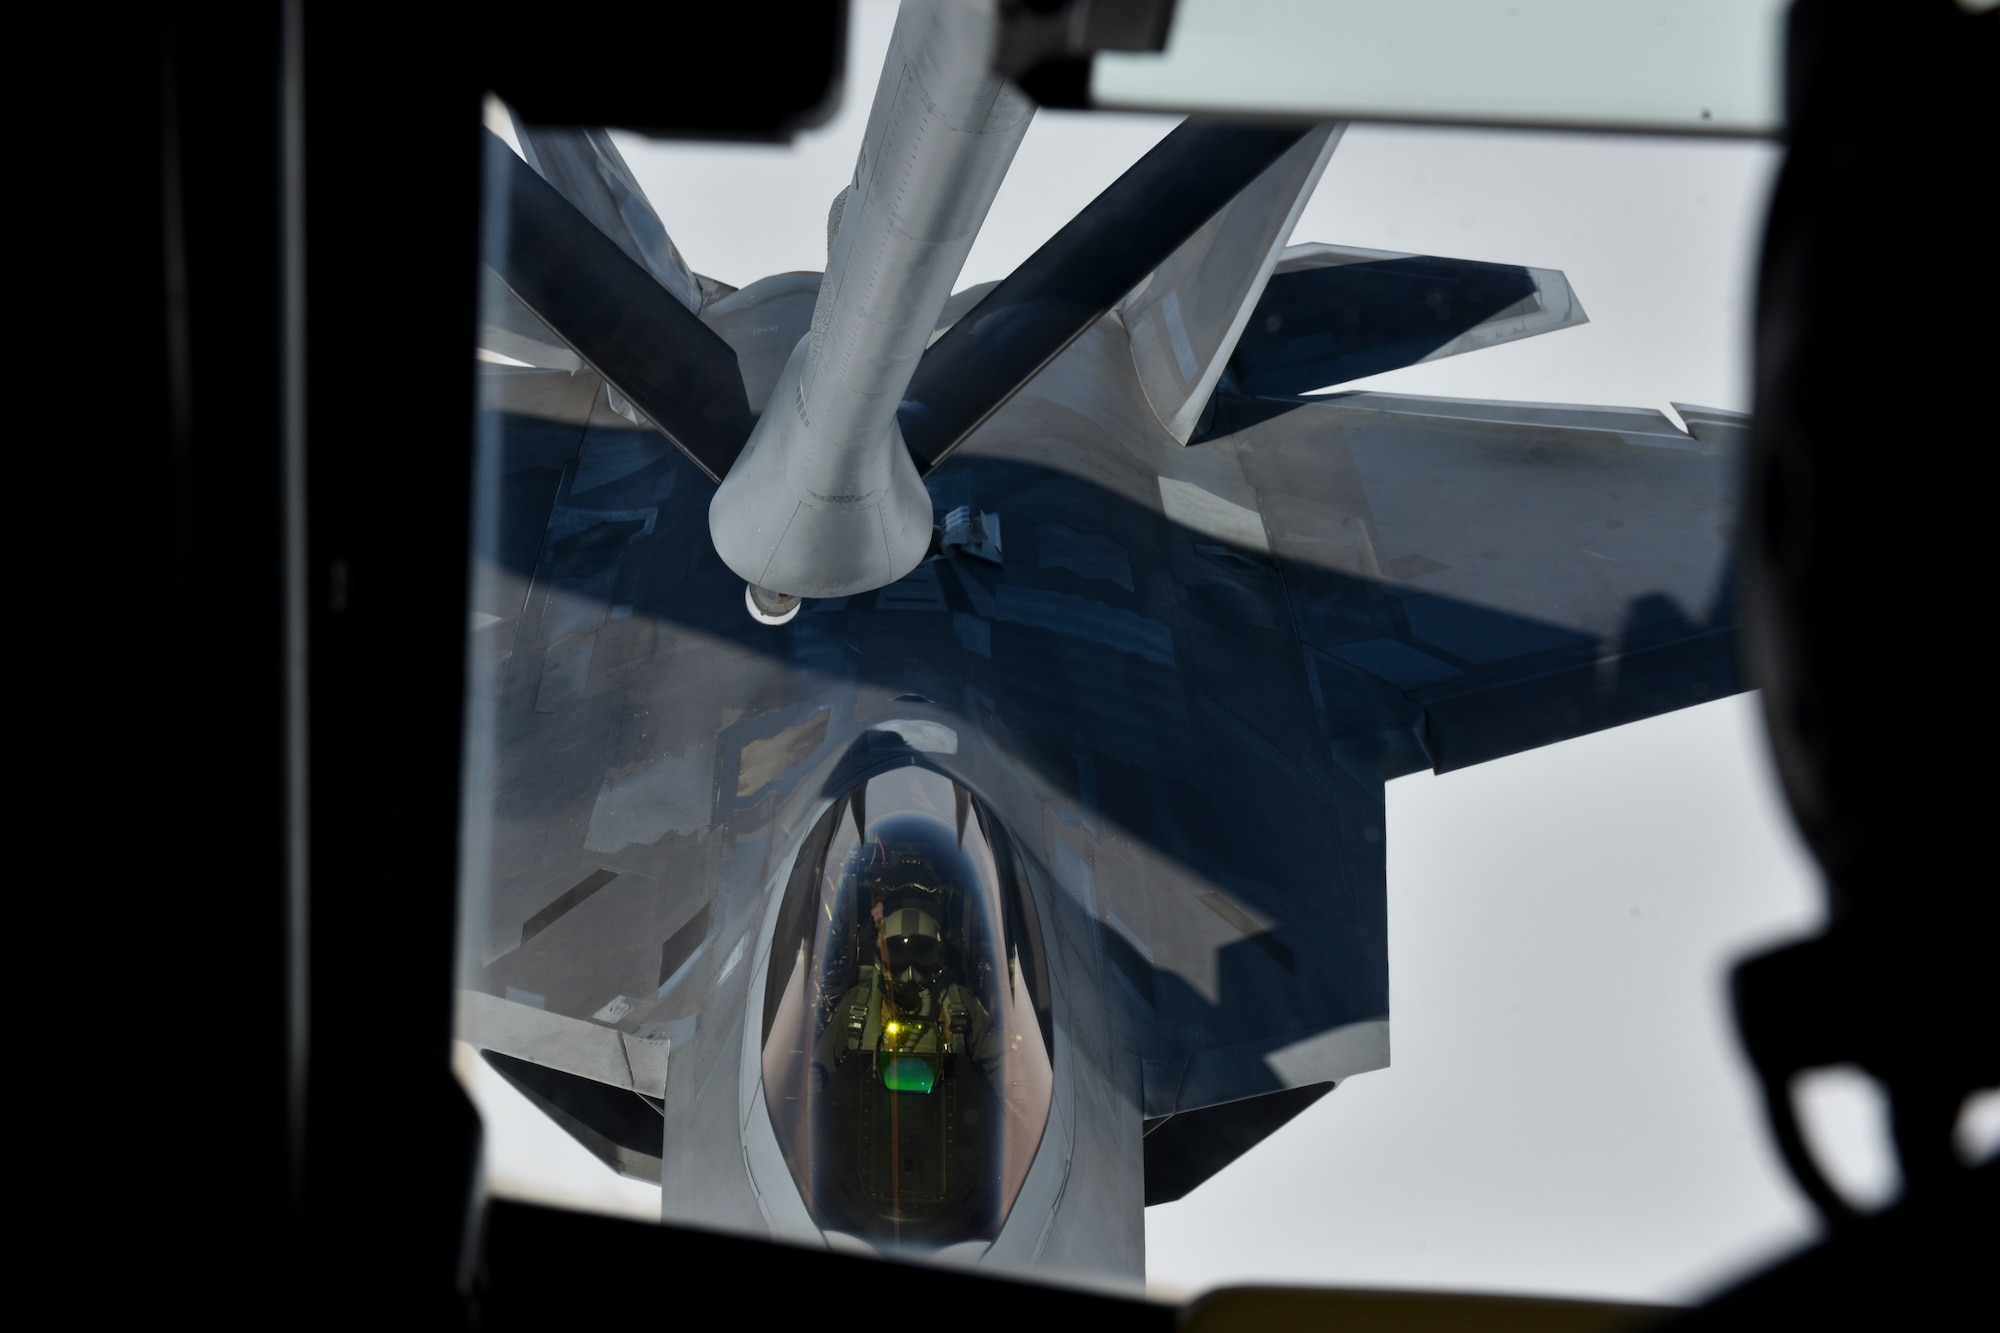 A U.S. Air Force F-22 Raptor assigned to the 525th Fighter Squadron, Joint Base Elmendorf-Richardson, Alaska, prepares to receive fuel from a 909th Air Refueling Squadron KC-135R Stratotanker during Northern Edge (NE19), May 16, 2019, over the Gulf of Alaska.